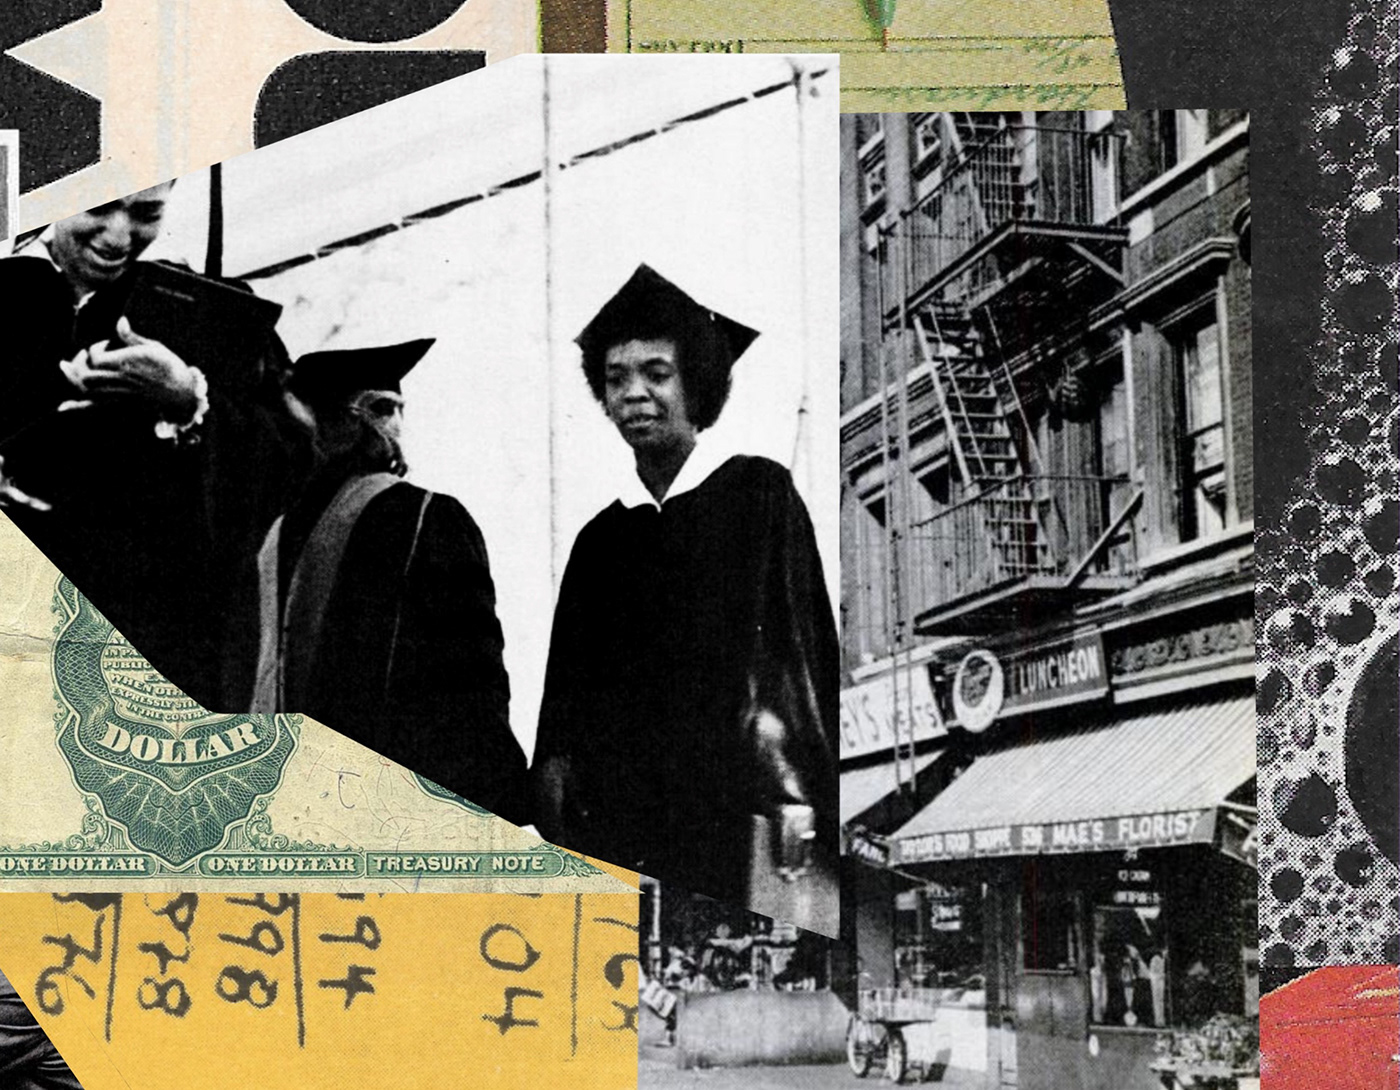 collage Editorial Illustration harvard business review magazine mixed media online print